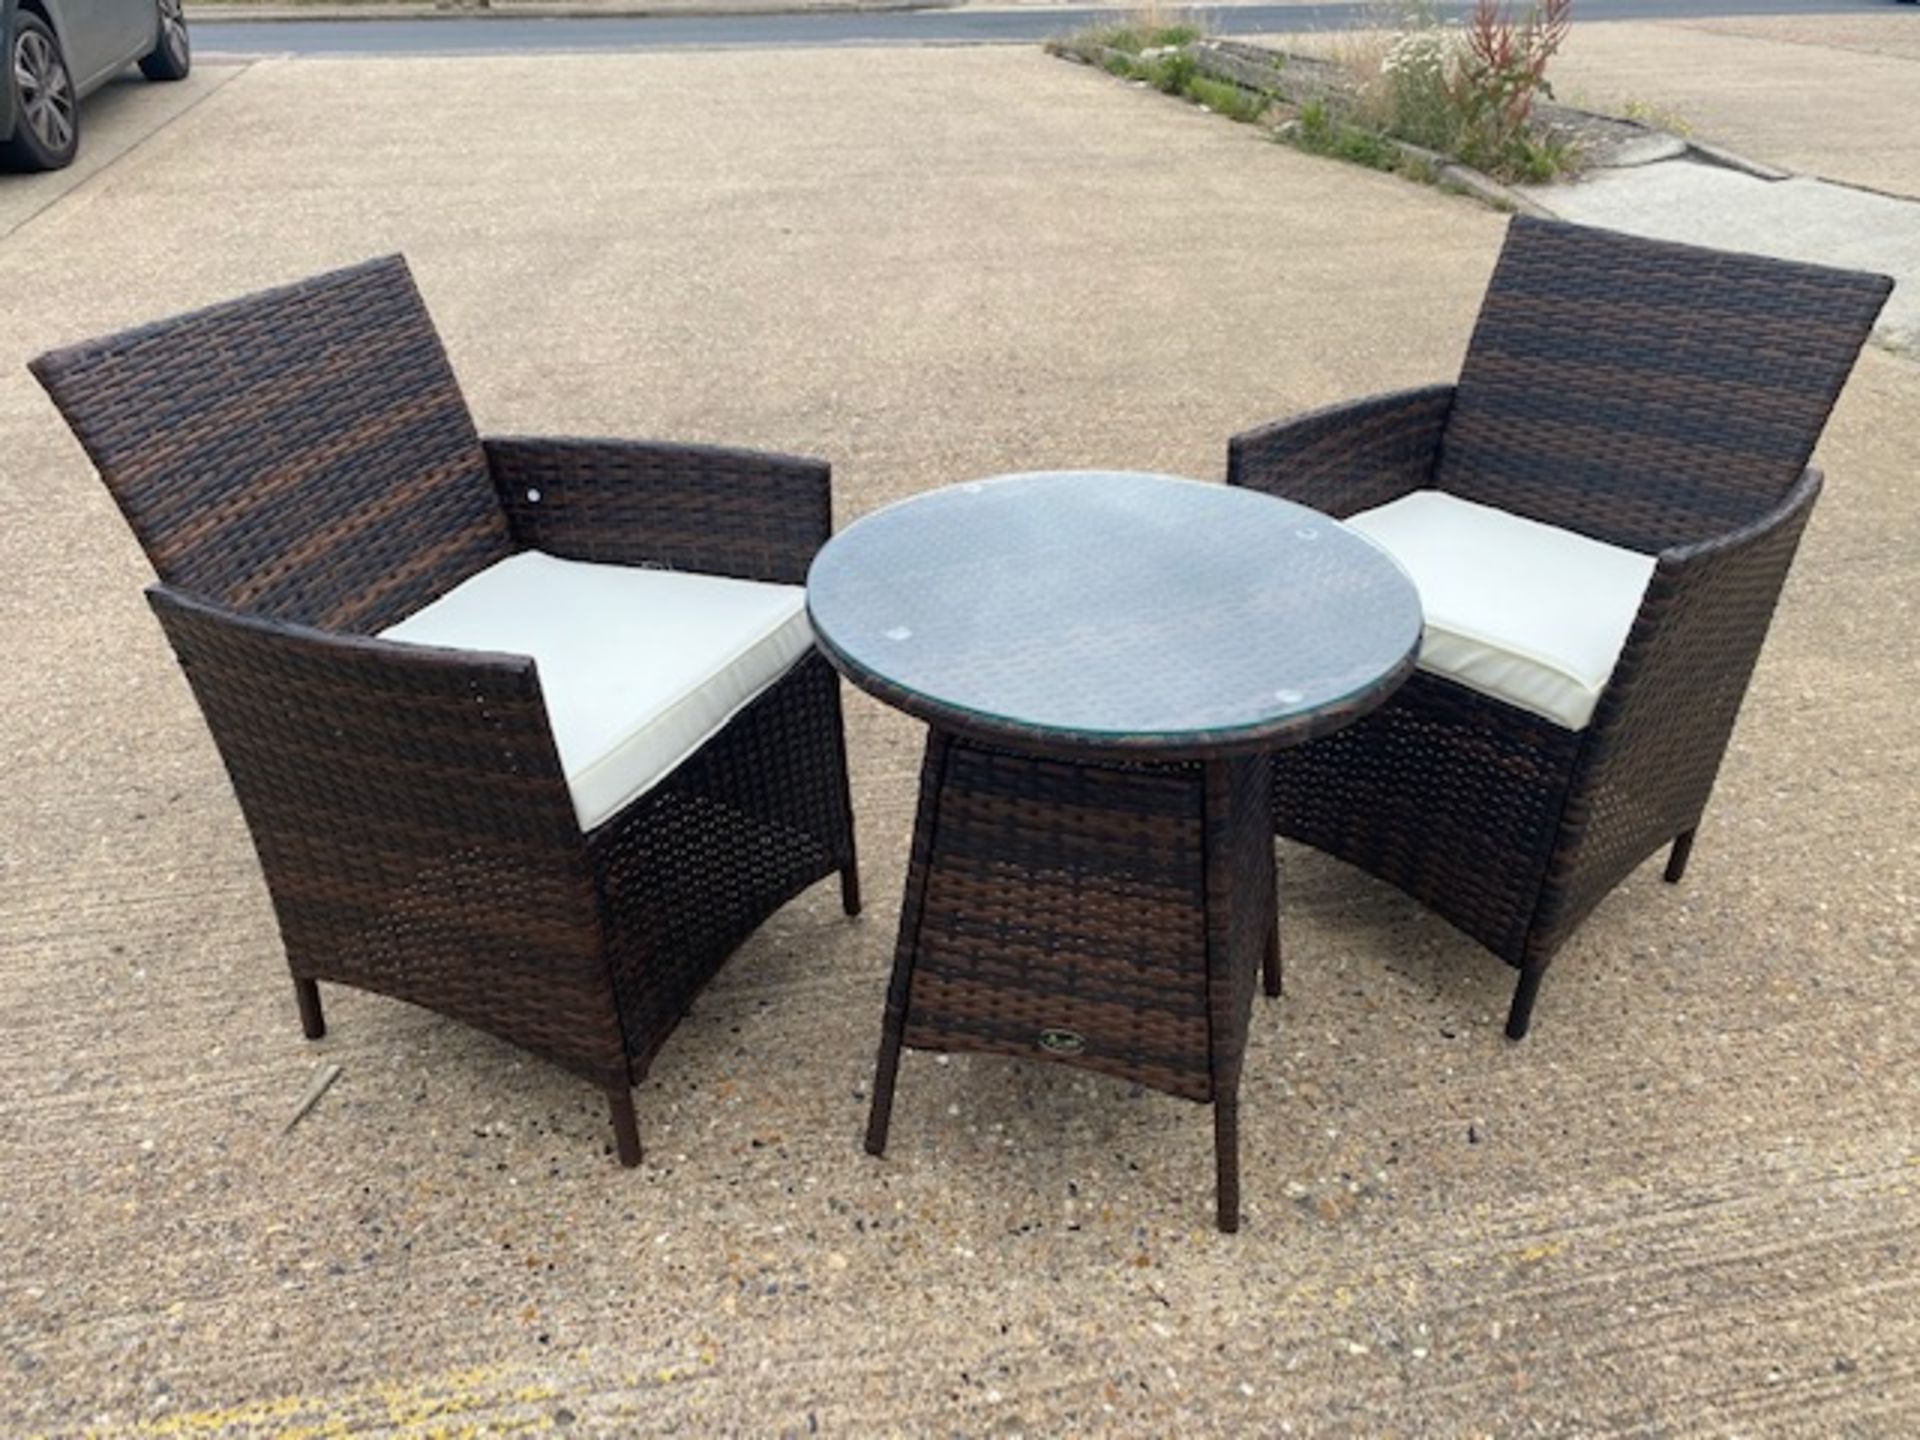 + VAT Brand New Chelsea Garden Company Two Person Dining Set -Item Is Immediatley Available - - Image 2 of 5